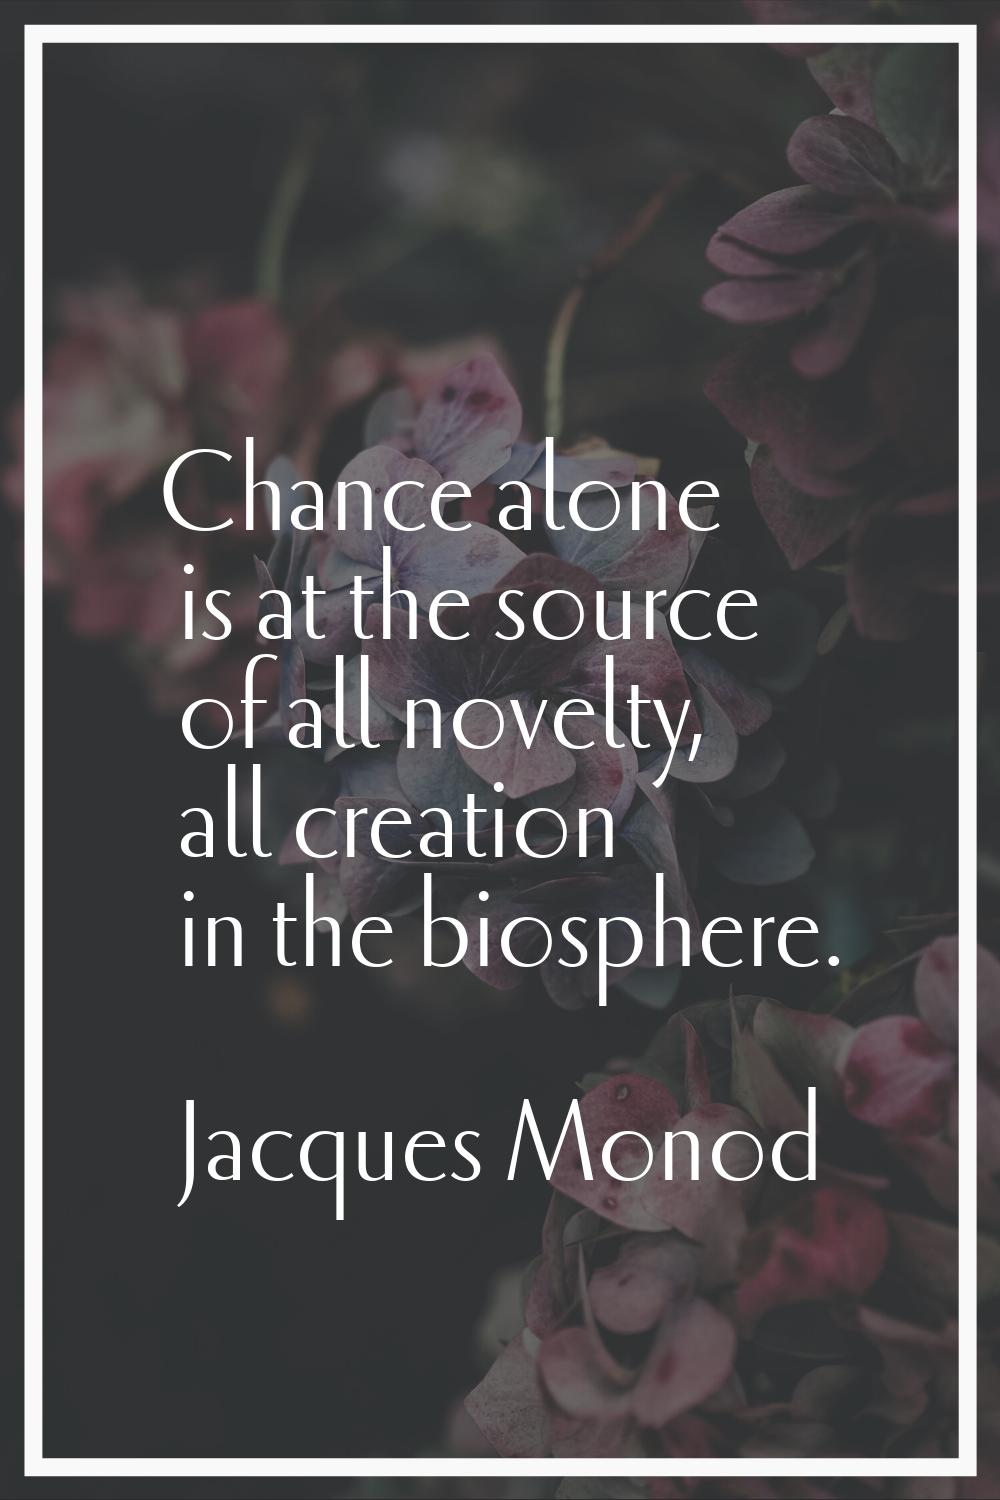 Chance alone is at the source of all novelty, all creation in the biosphere.